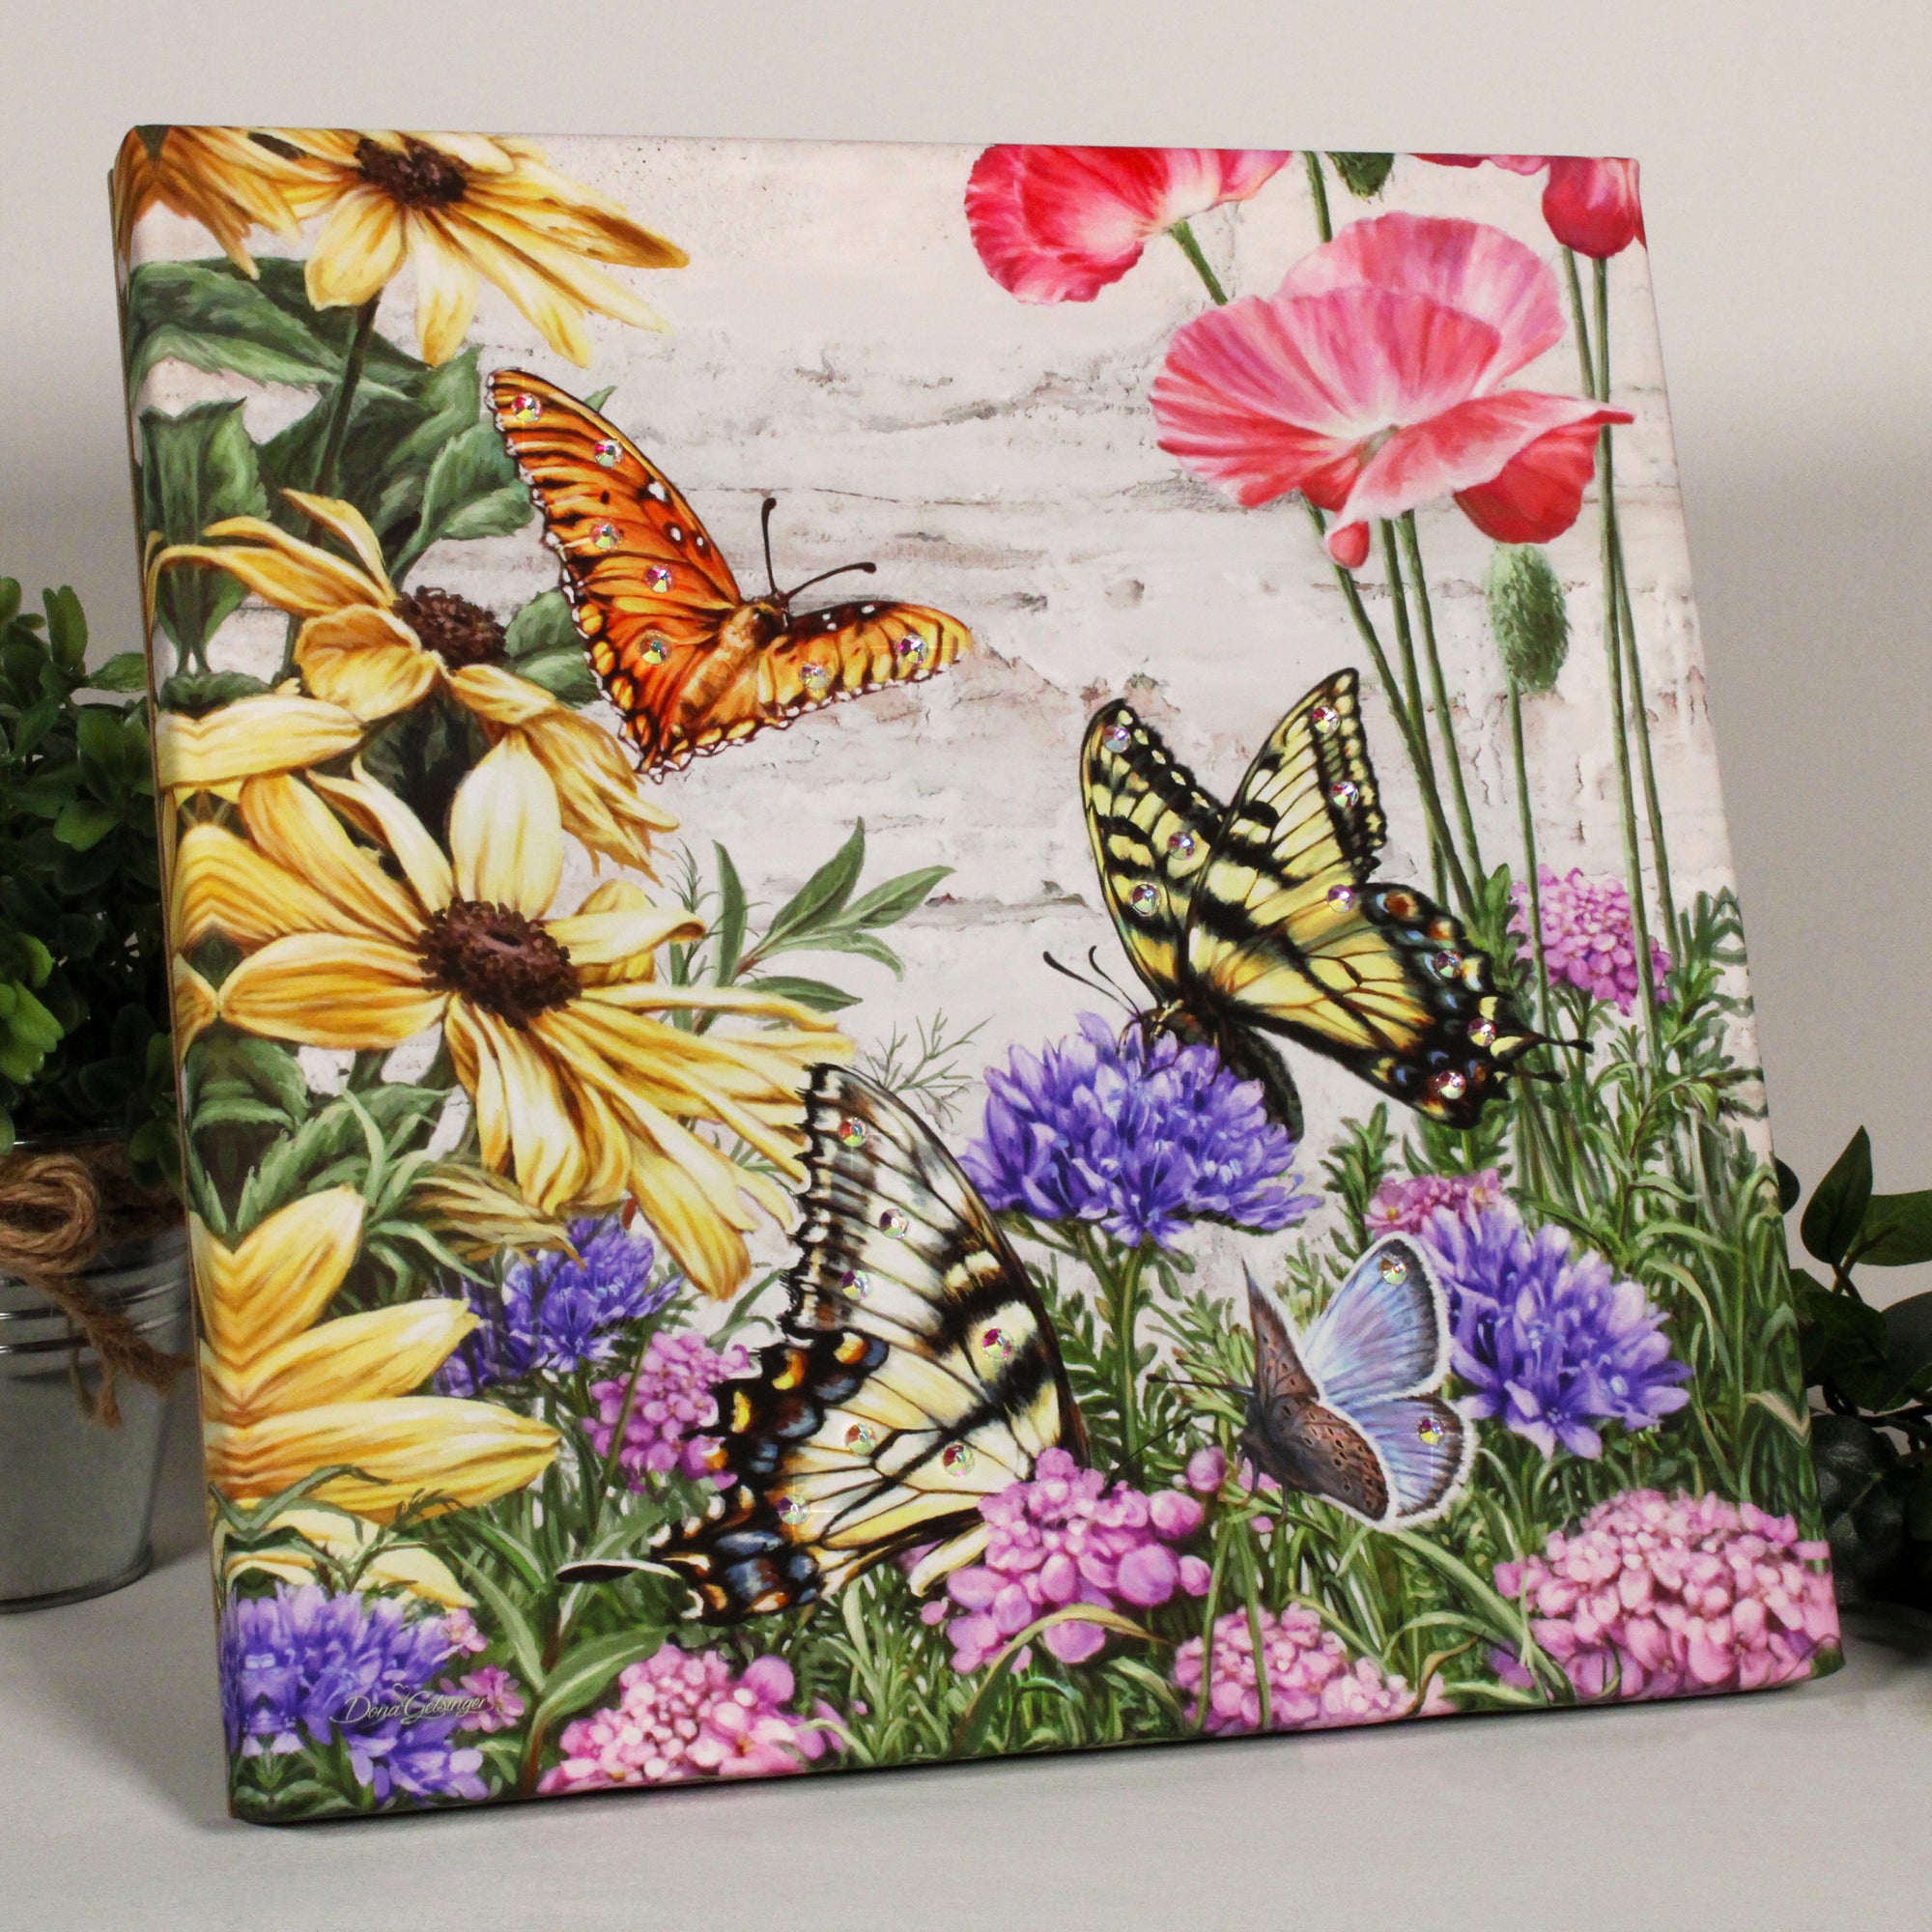  This stunning piece of art captures the essence of a beautiful garden in full bloom, teeming with life and color.